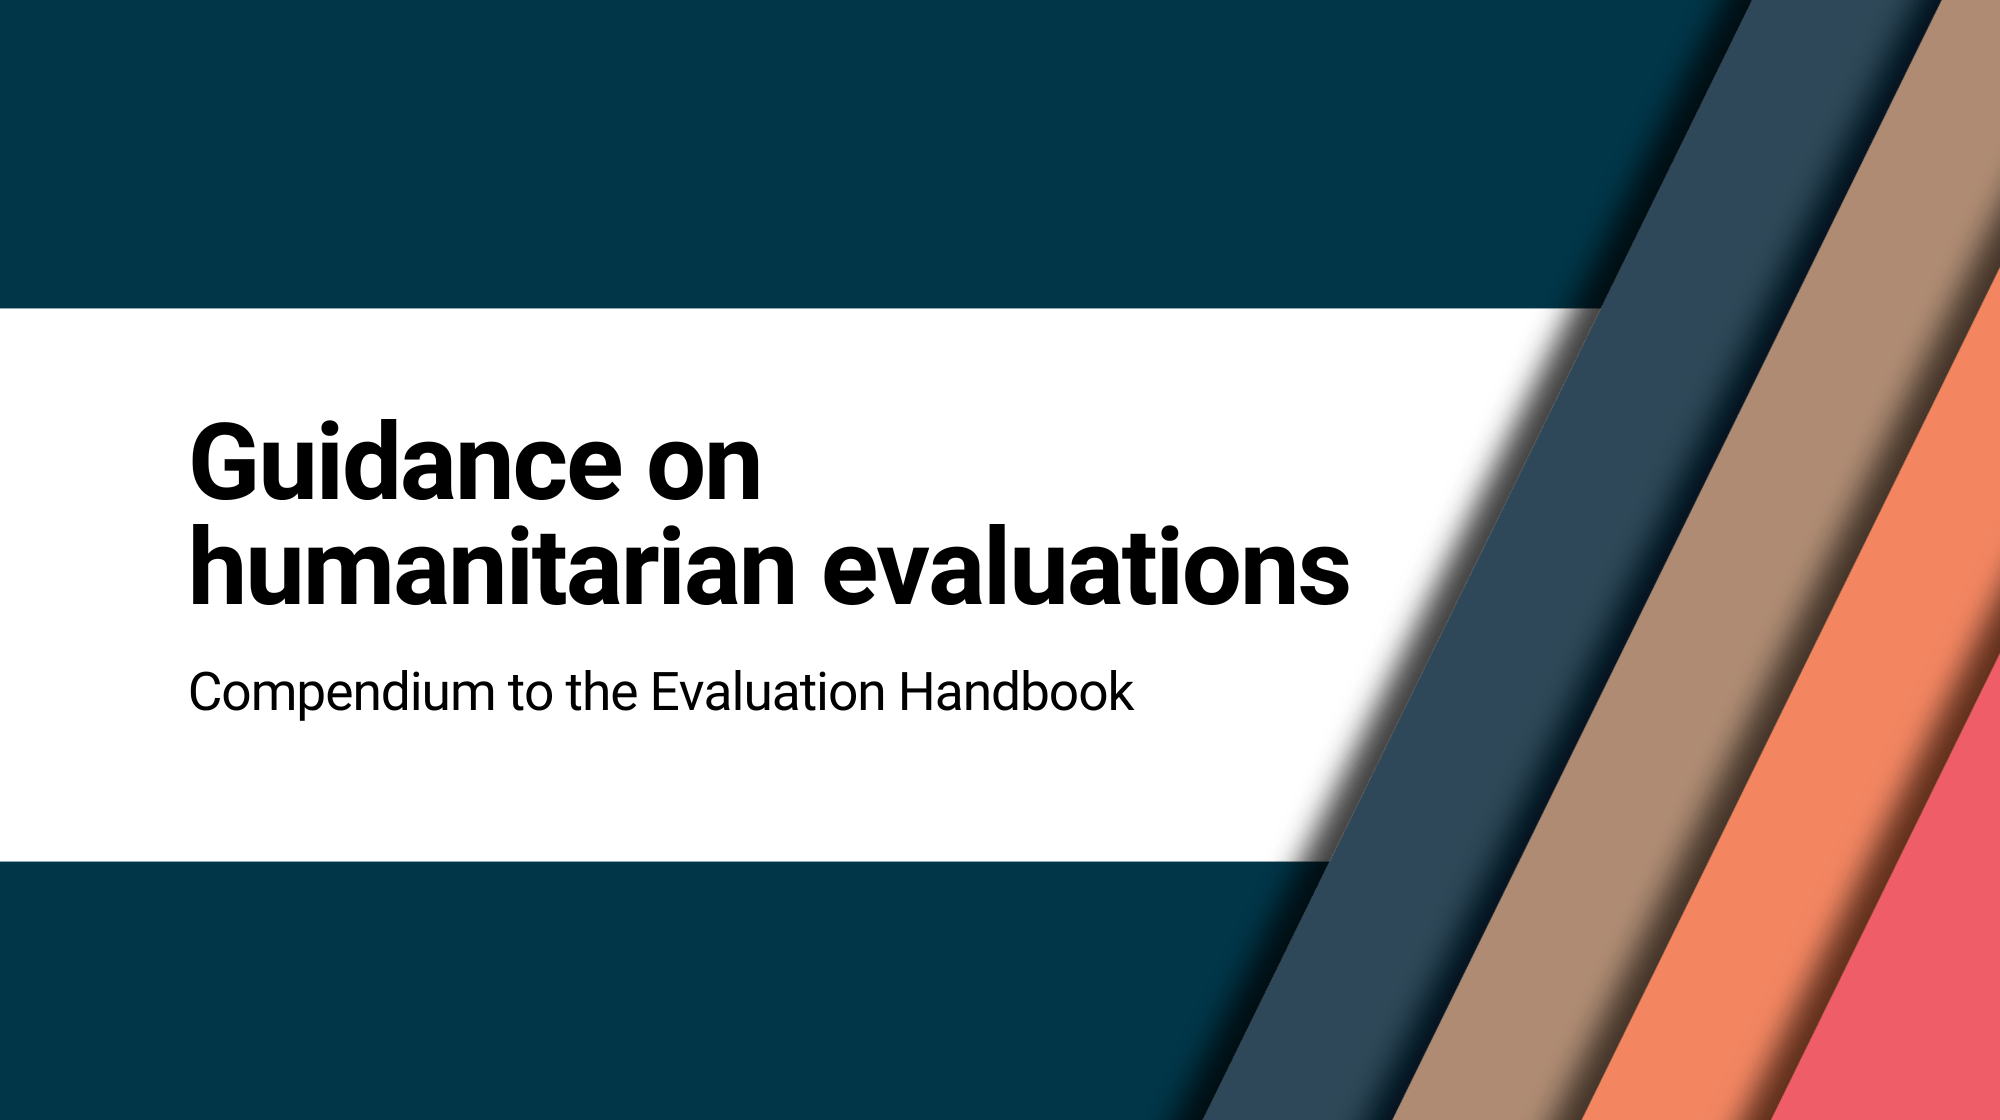 Guidance on humanitarian evaluations: Compendium to the Evaluation Handbook